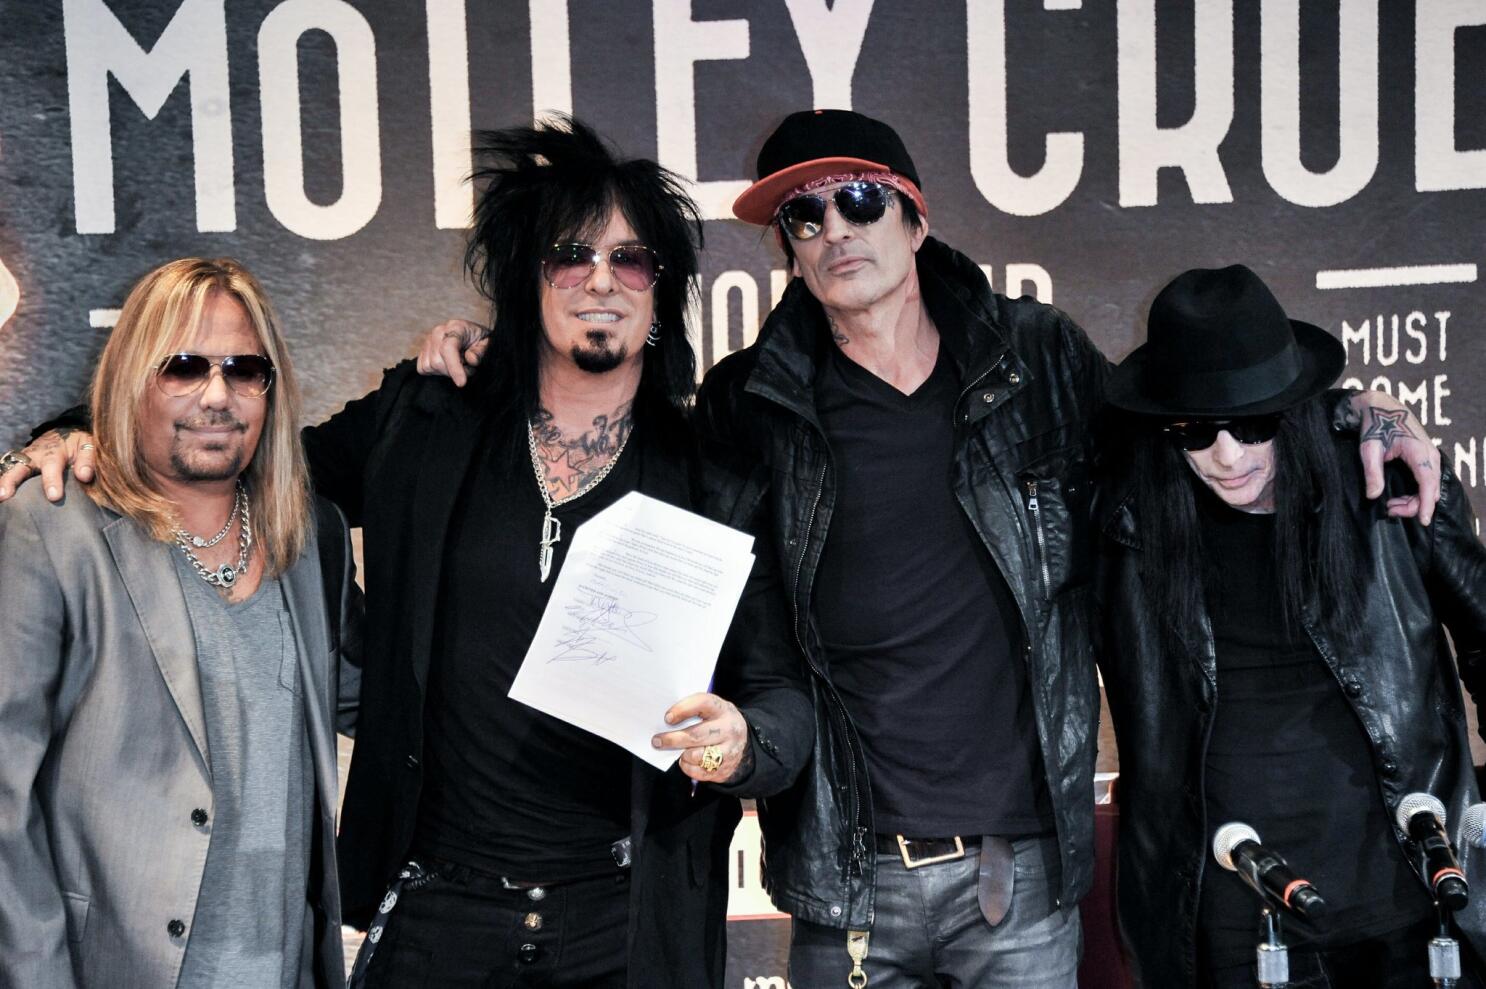 Mötley Crüe to reunite, four years after final 'farewell' show, for tour  with Def Leppard, Poison, Joan Jett - The San Diego Union-Tribune